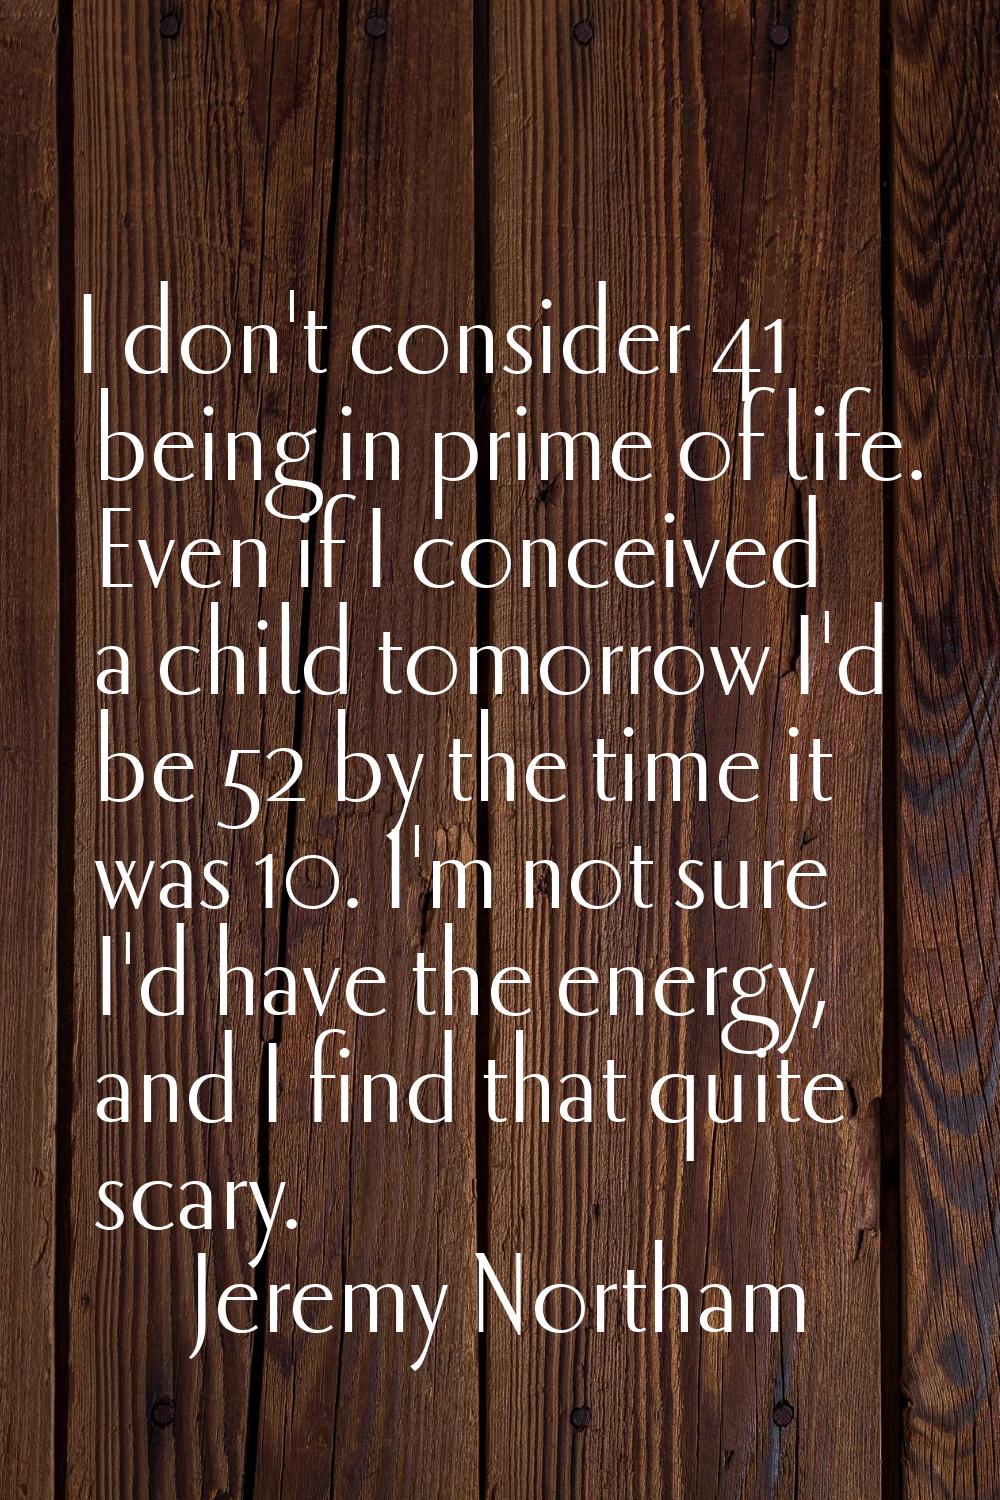 I don't consider 41 being in prime of life. Even if I conceived a child tomorrow I'd be 52 by the t